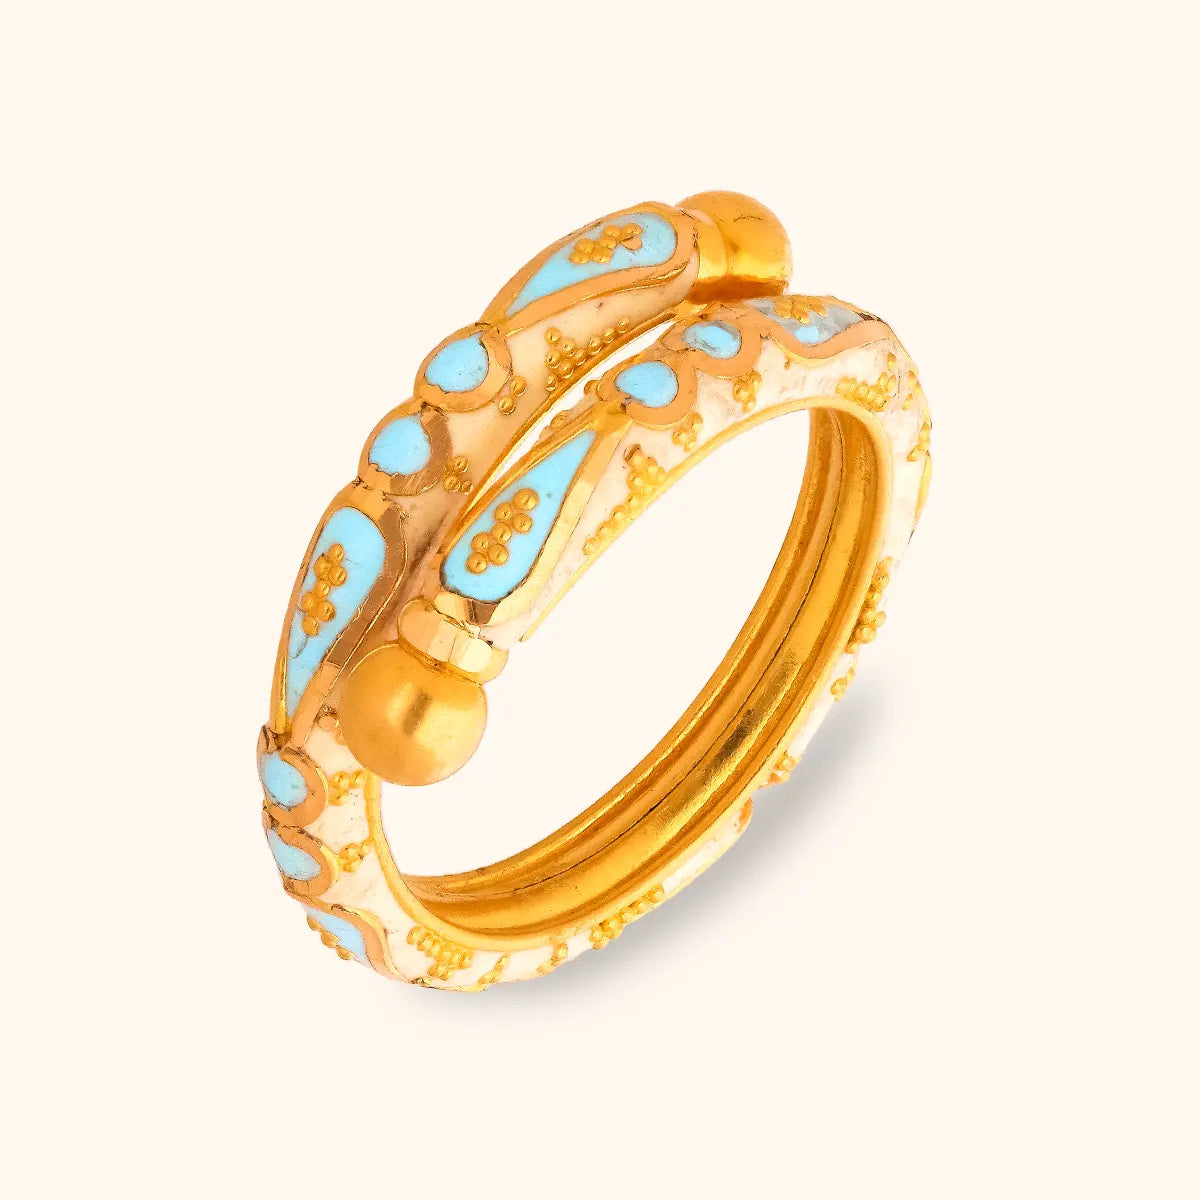 Gold ring made of 14K yellow gold - more prominent protruding round zircon